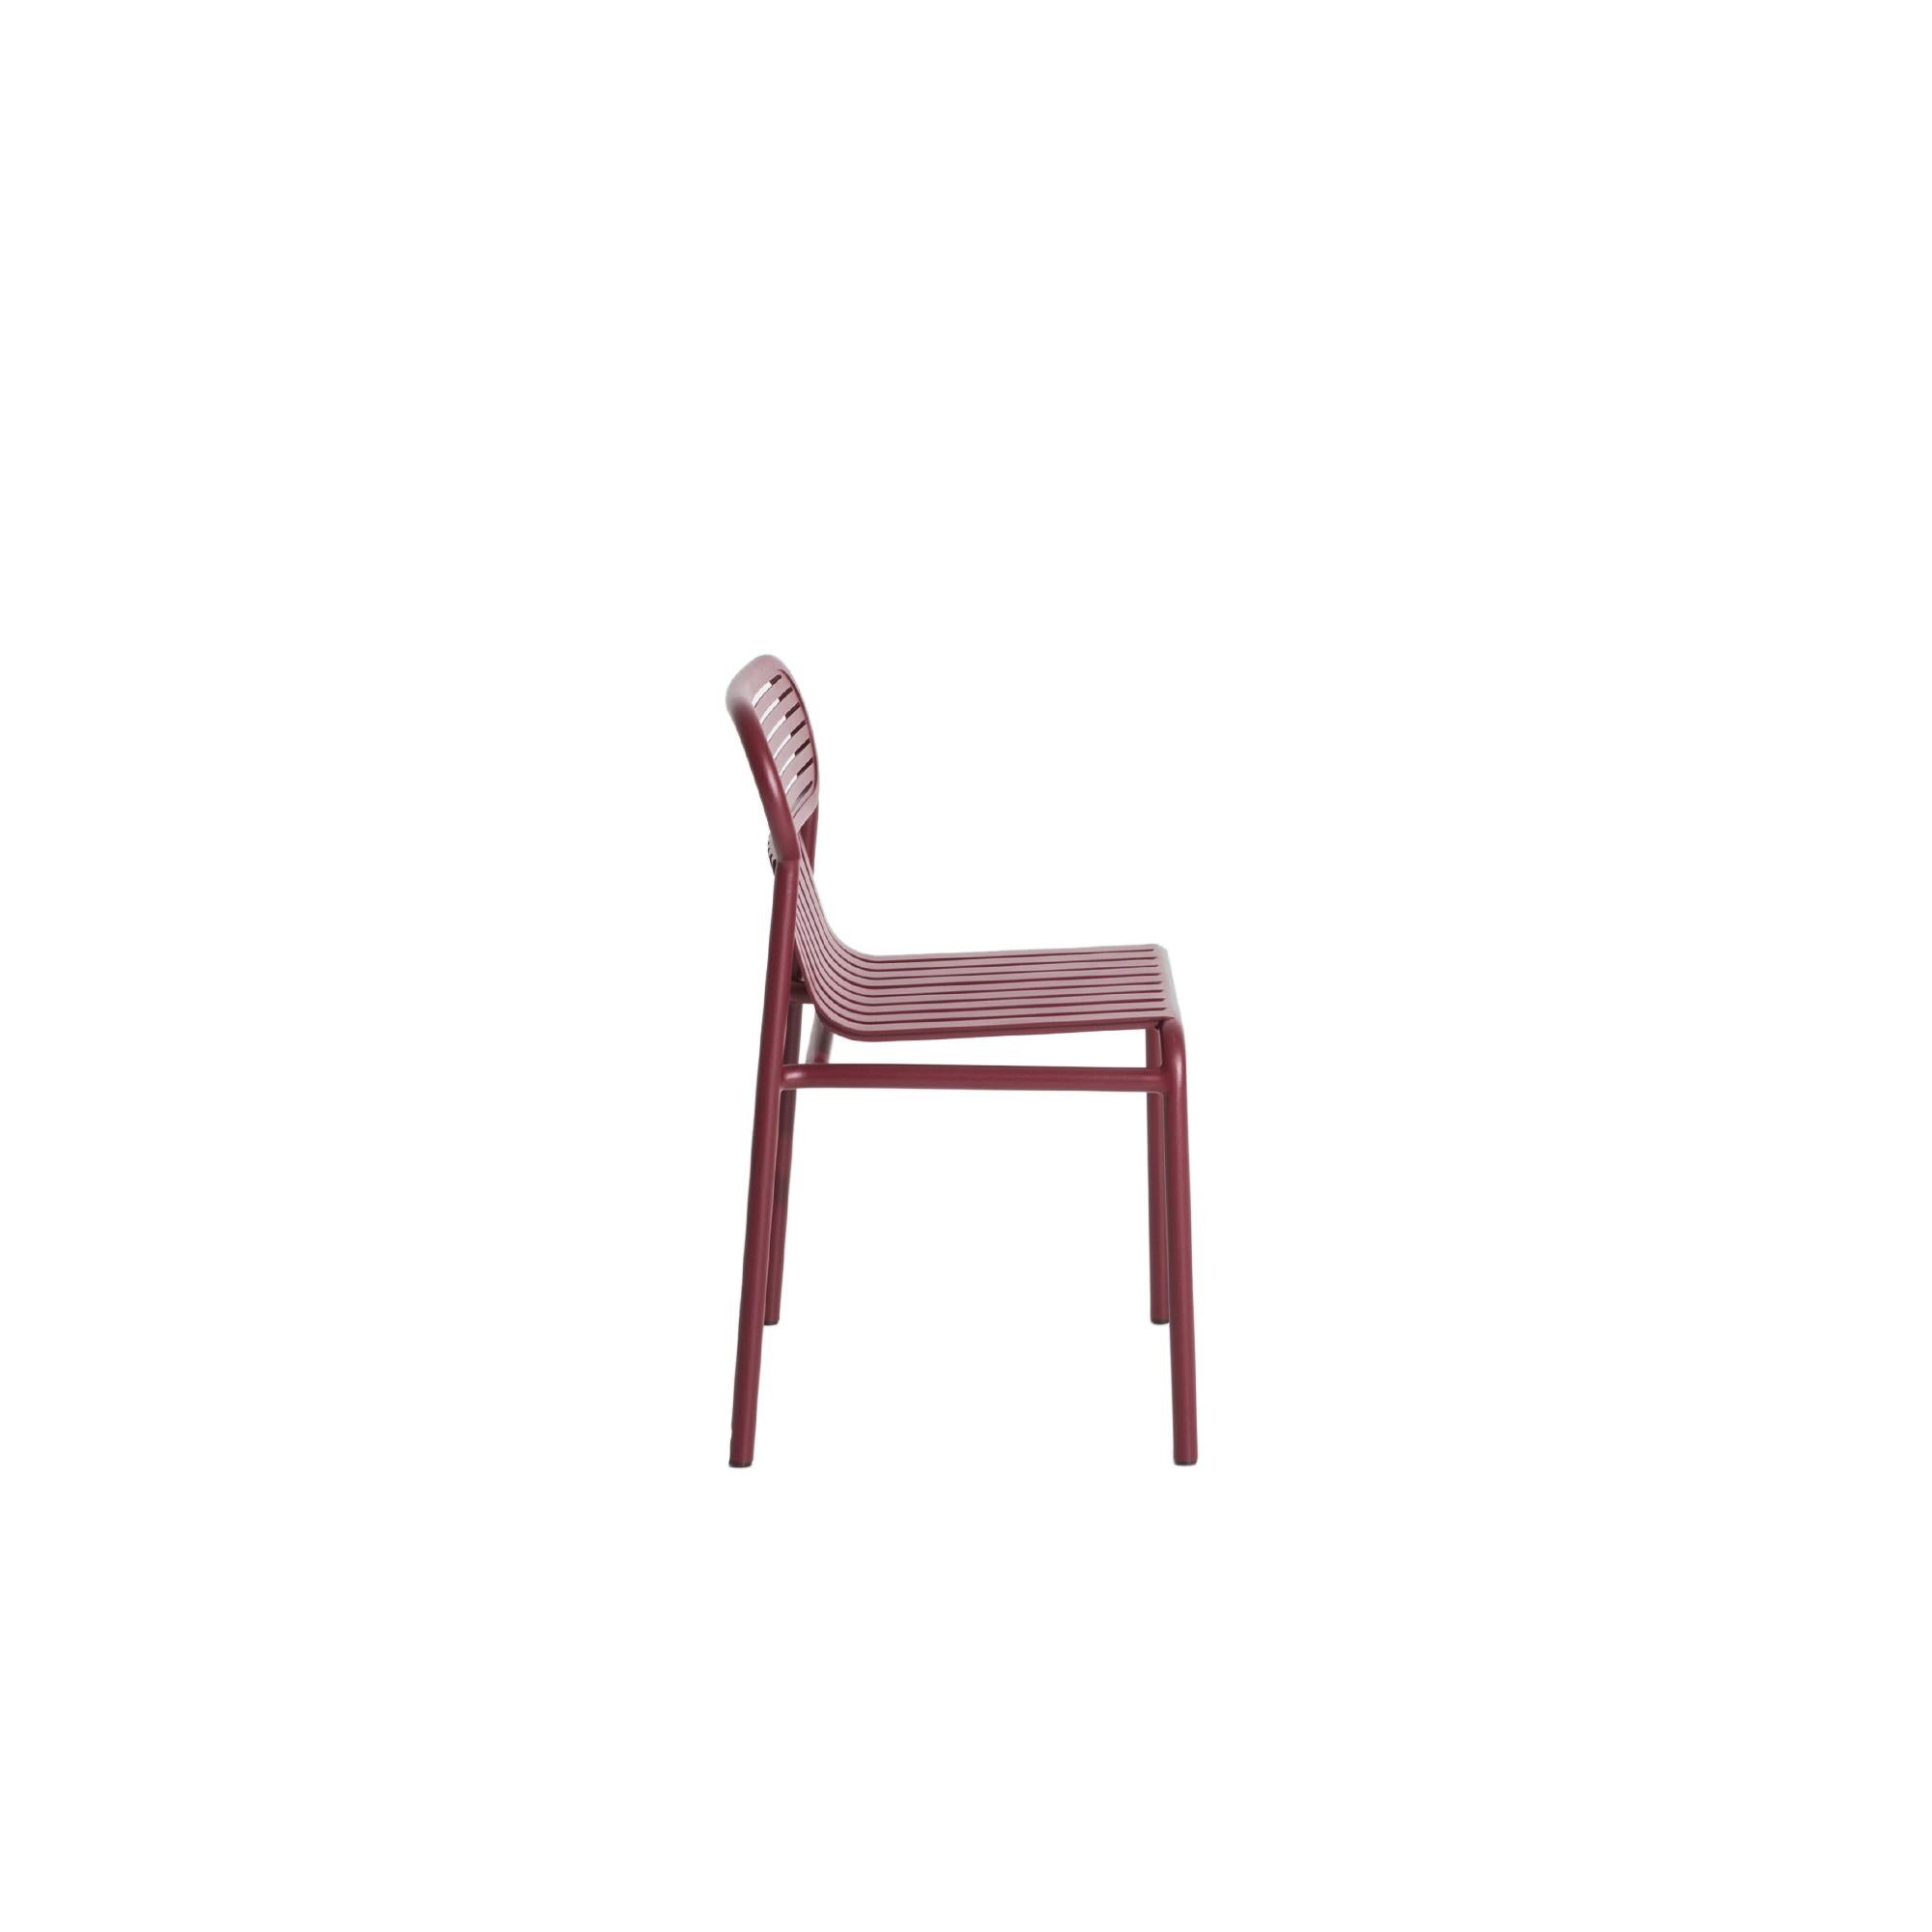 Petite Friture Week-End Chair in Burgundy Aluminium by Studio BrichetZiegler, 2017

The week-end collection is a full range of outdoor furniture, in aluminium grained epoxy paint, matt finish, that includes 18 functions and 8 colours for the